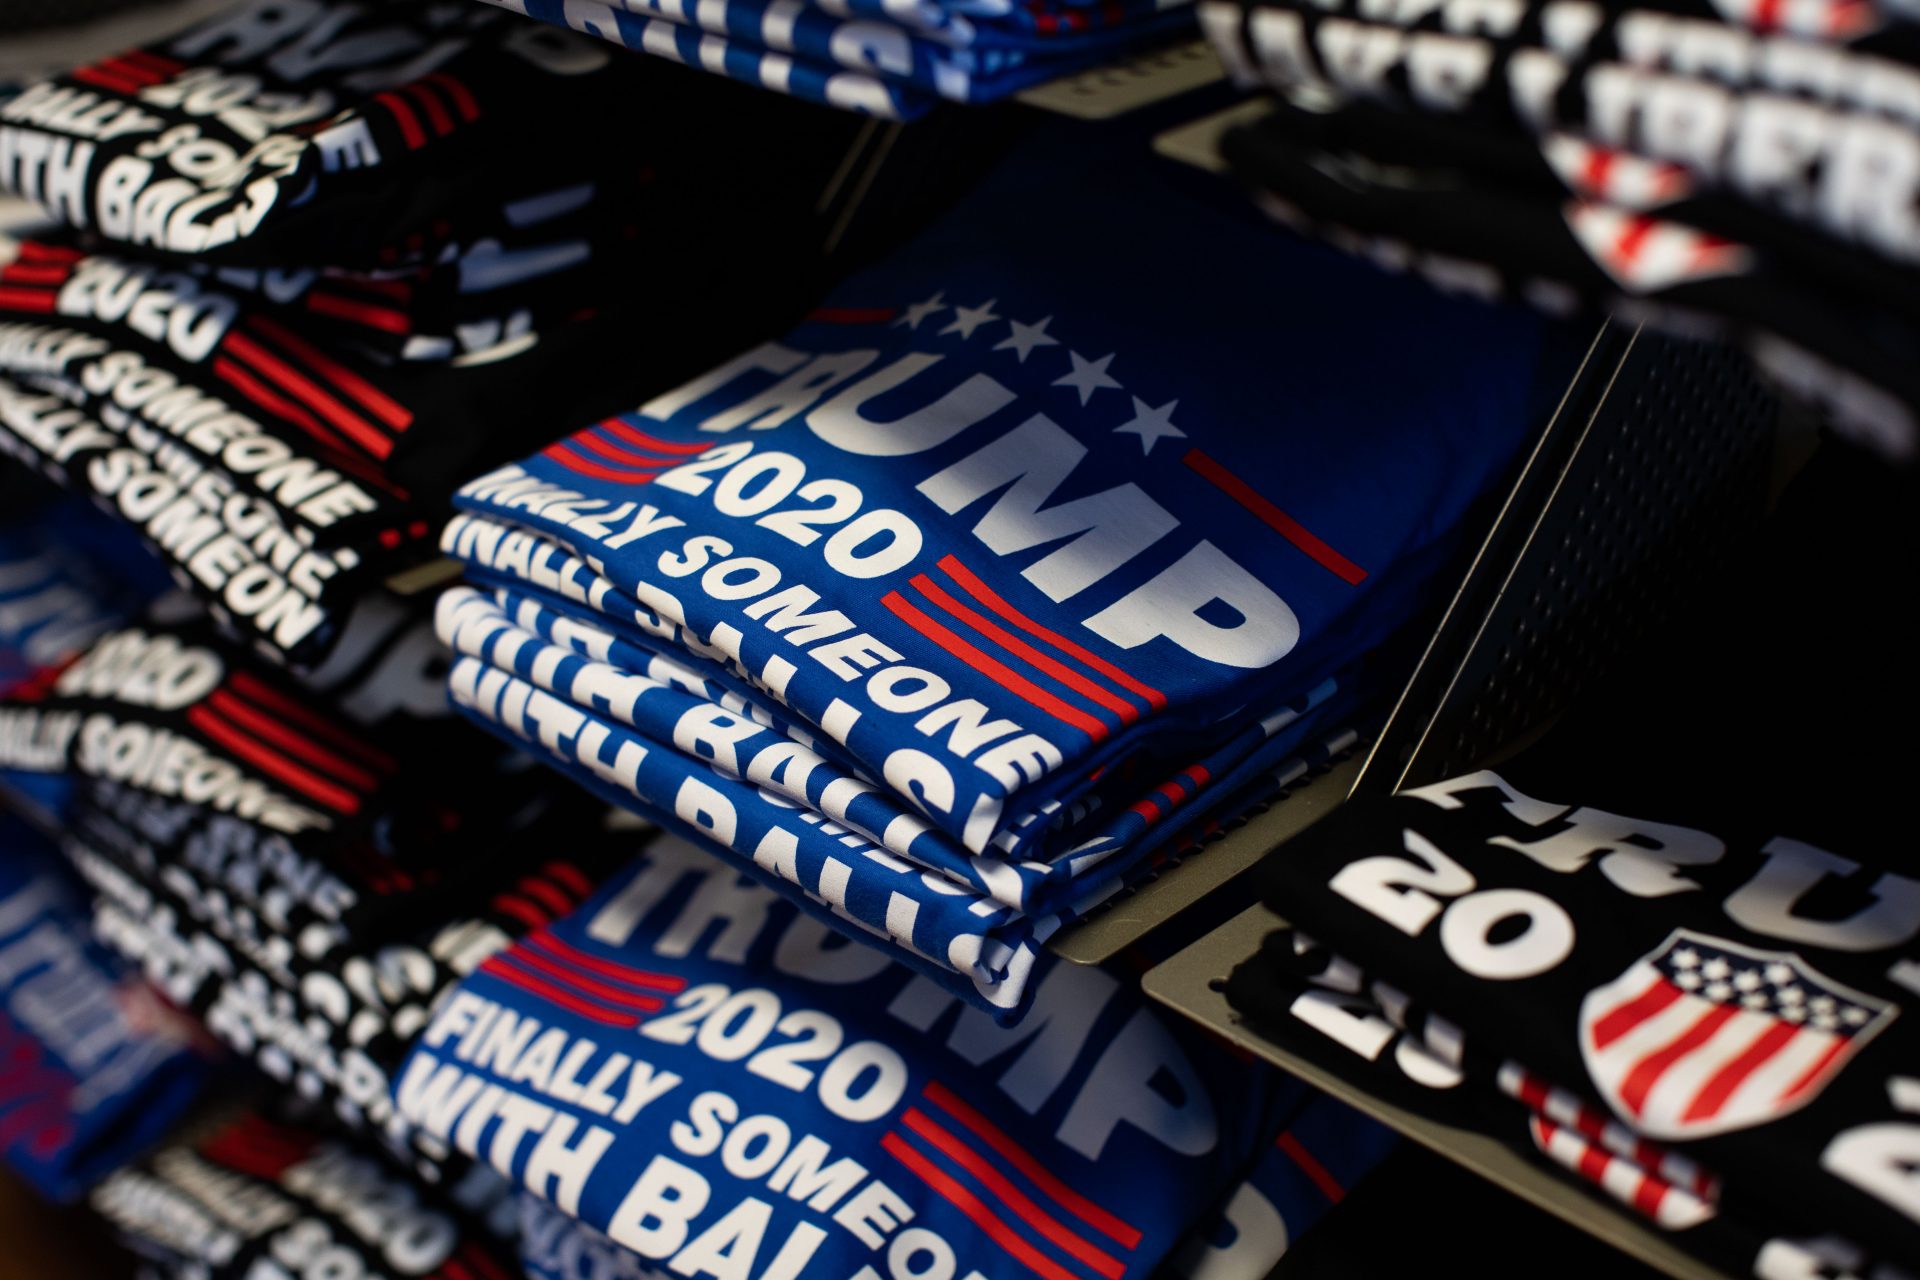 Trump 2020 t-shirts for sale at the Trump Store in Bensalem, Pennsylvania.